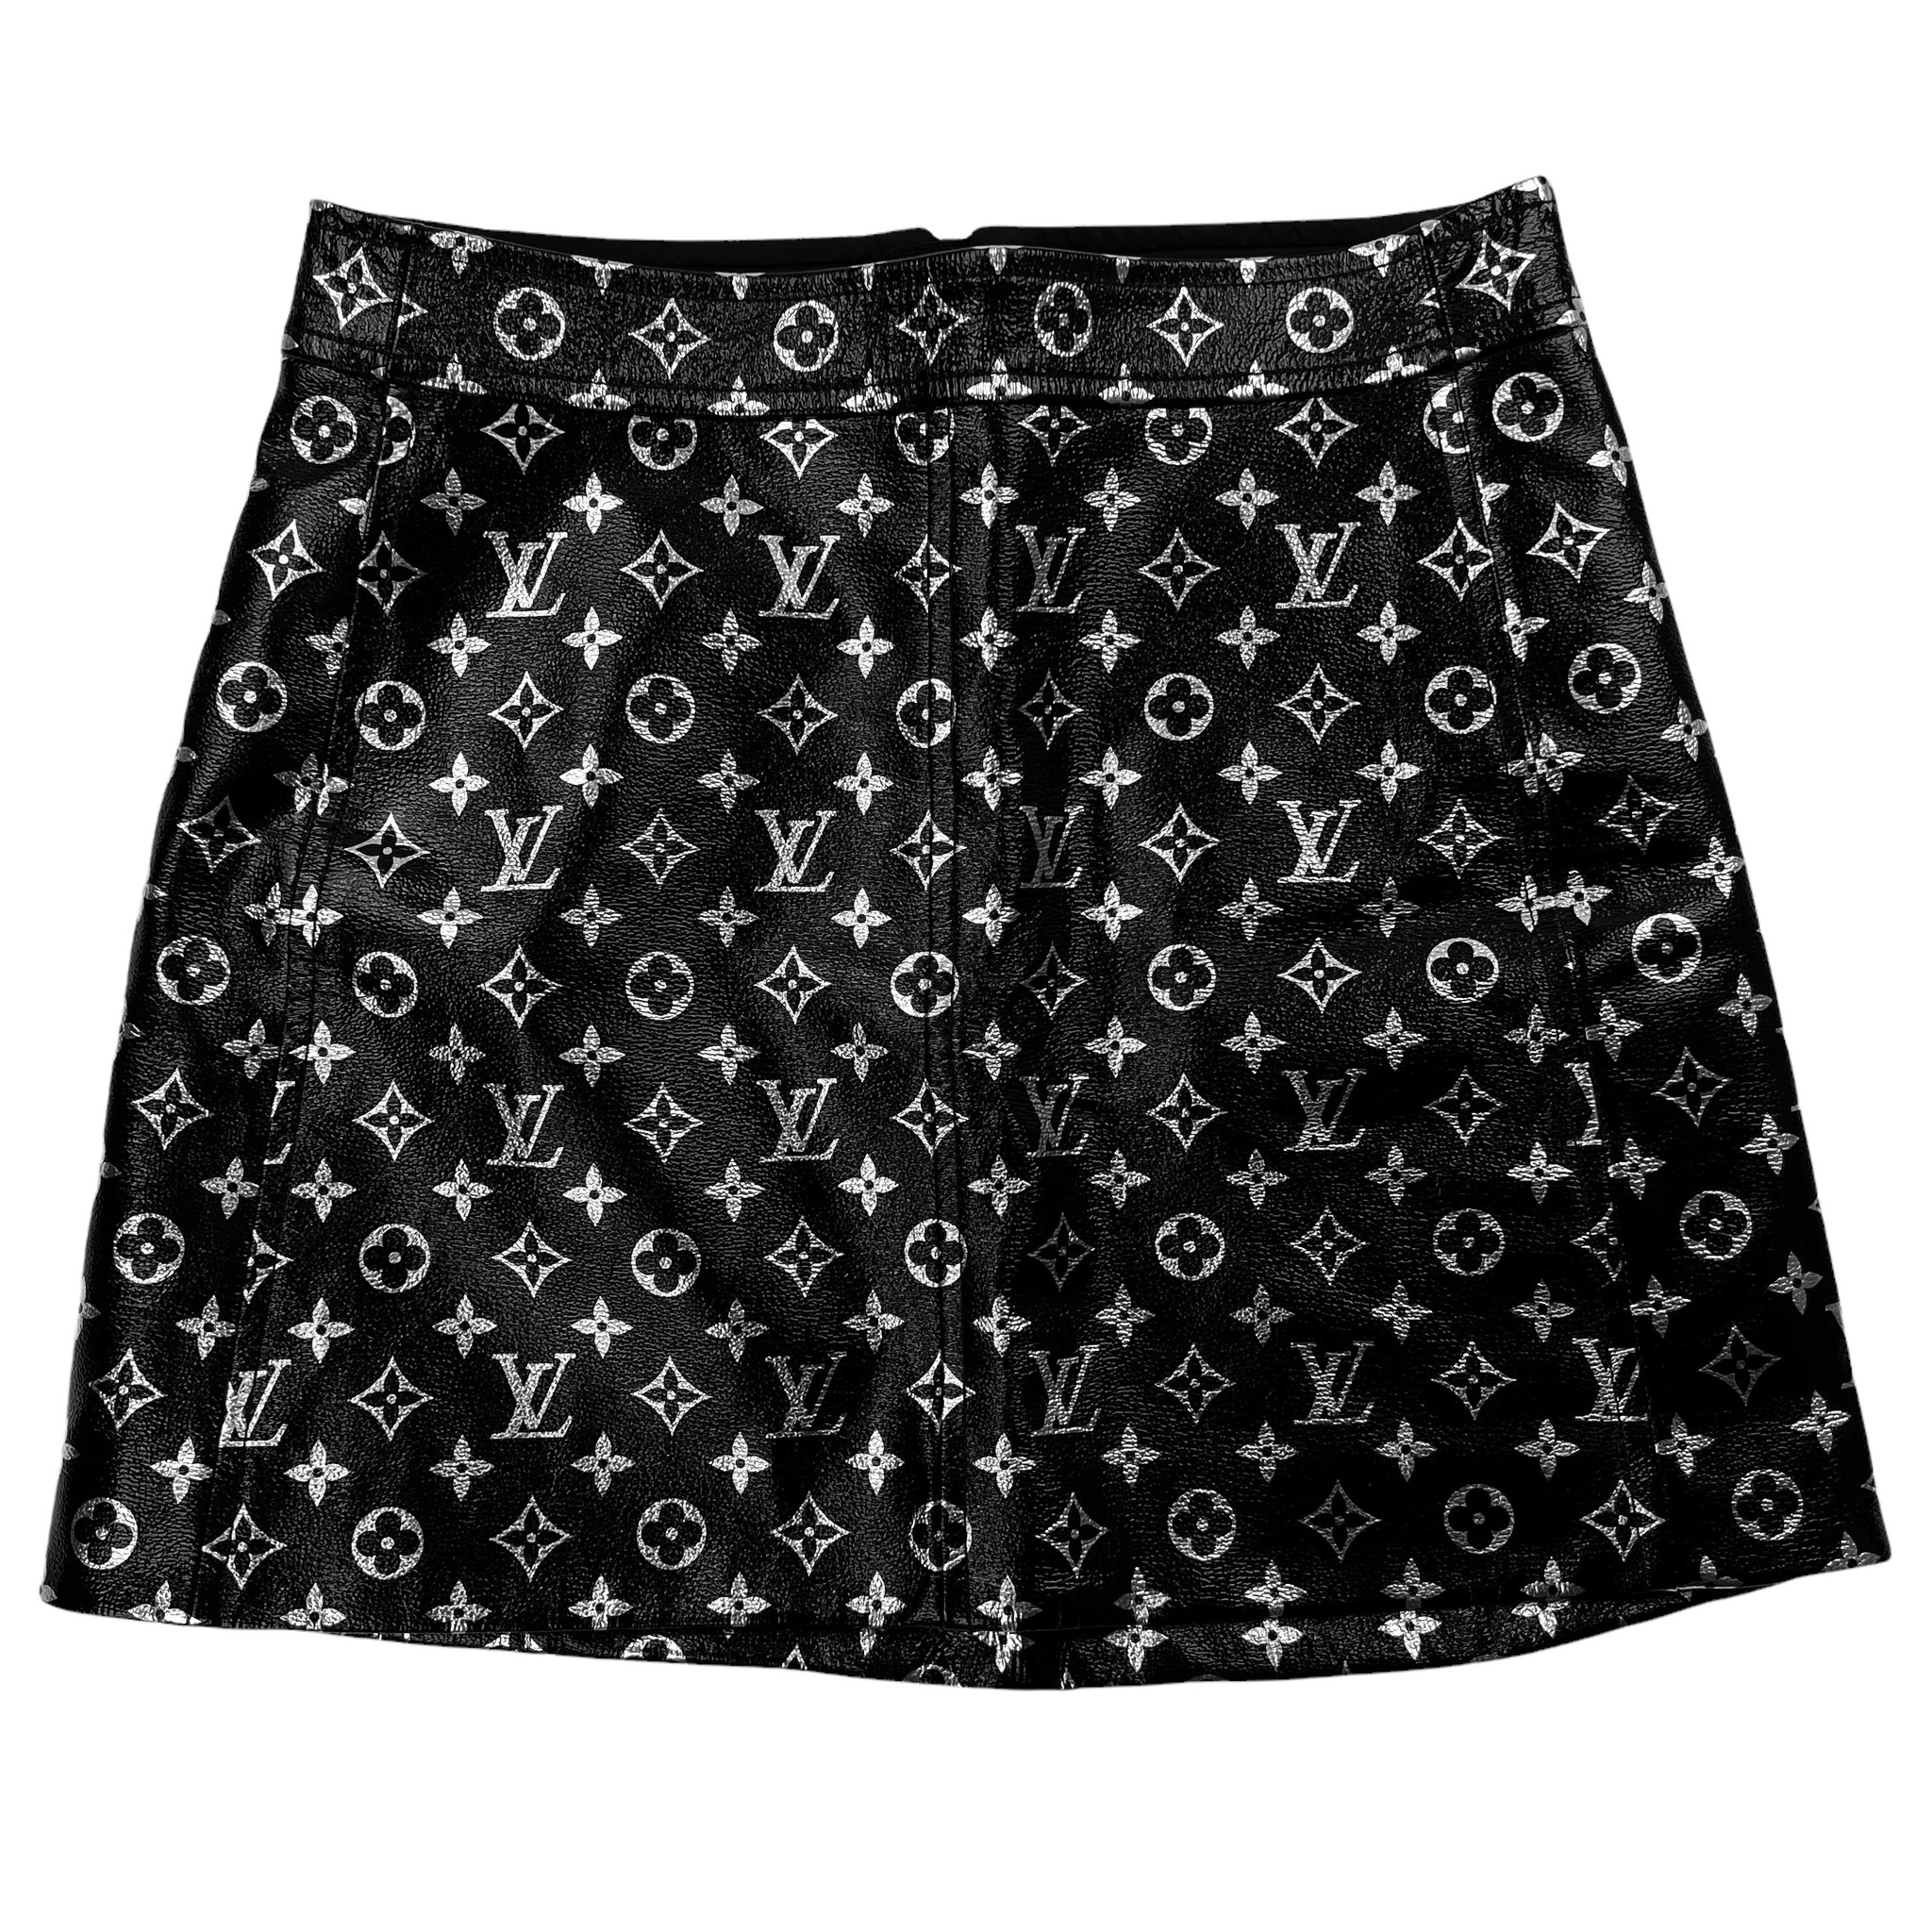 Products By Louis Vuitton: Monogram Printed Leather Mini Skirt